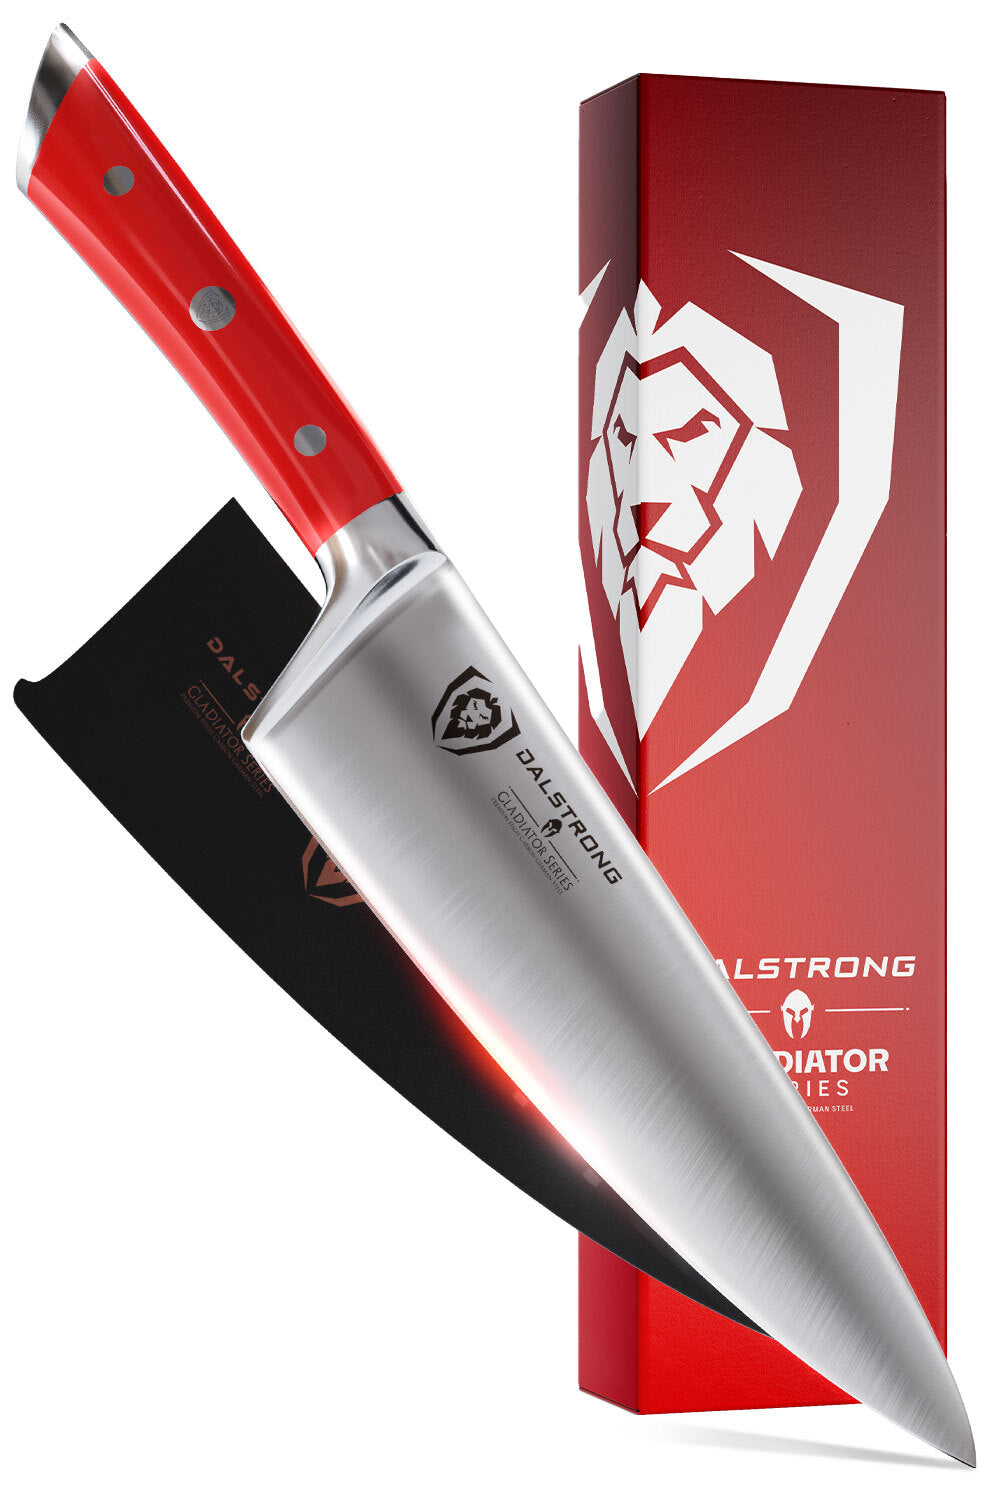 Dalstrong gladiator series 8 inch chef knife with red handle in front of it's premium packaging.